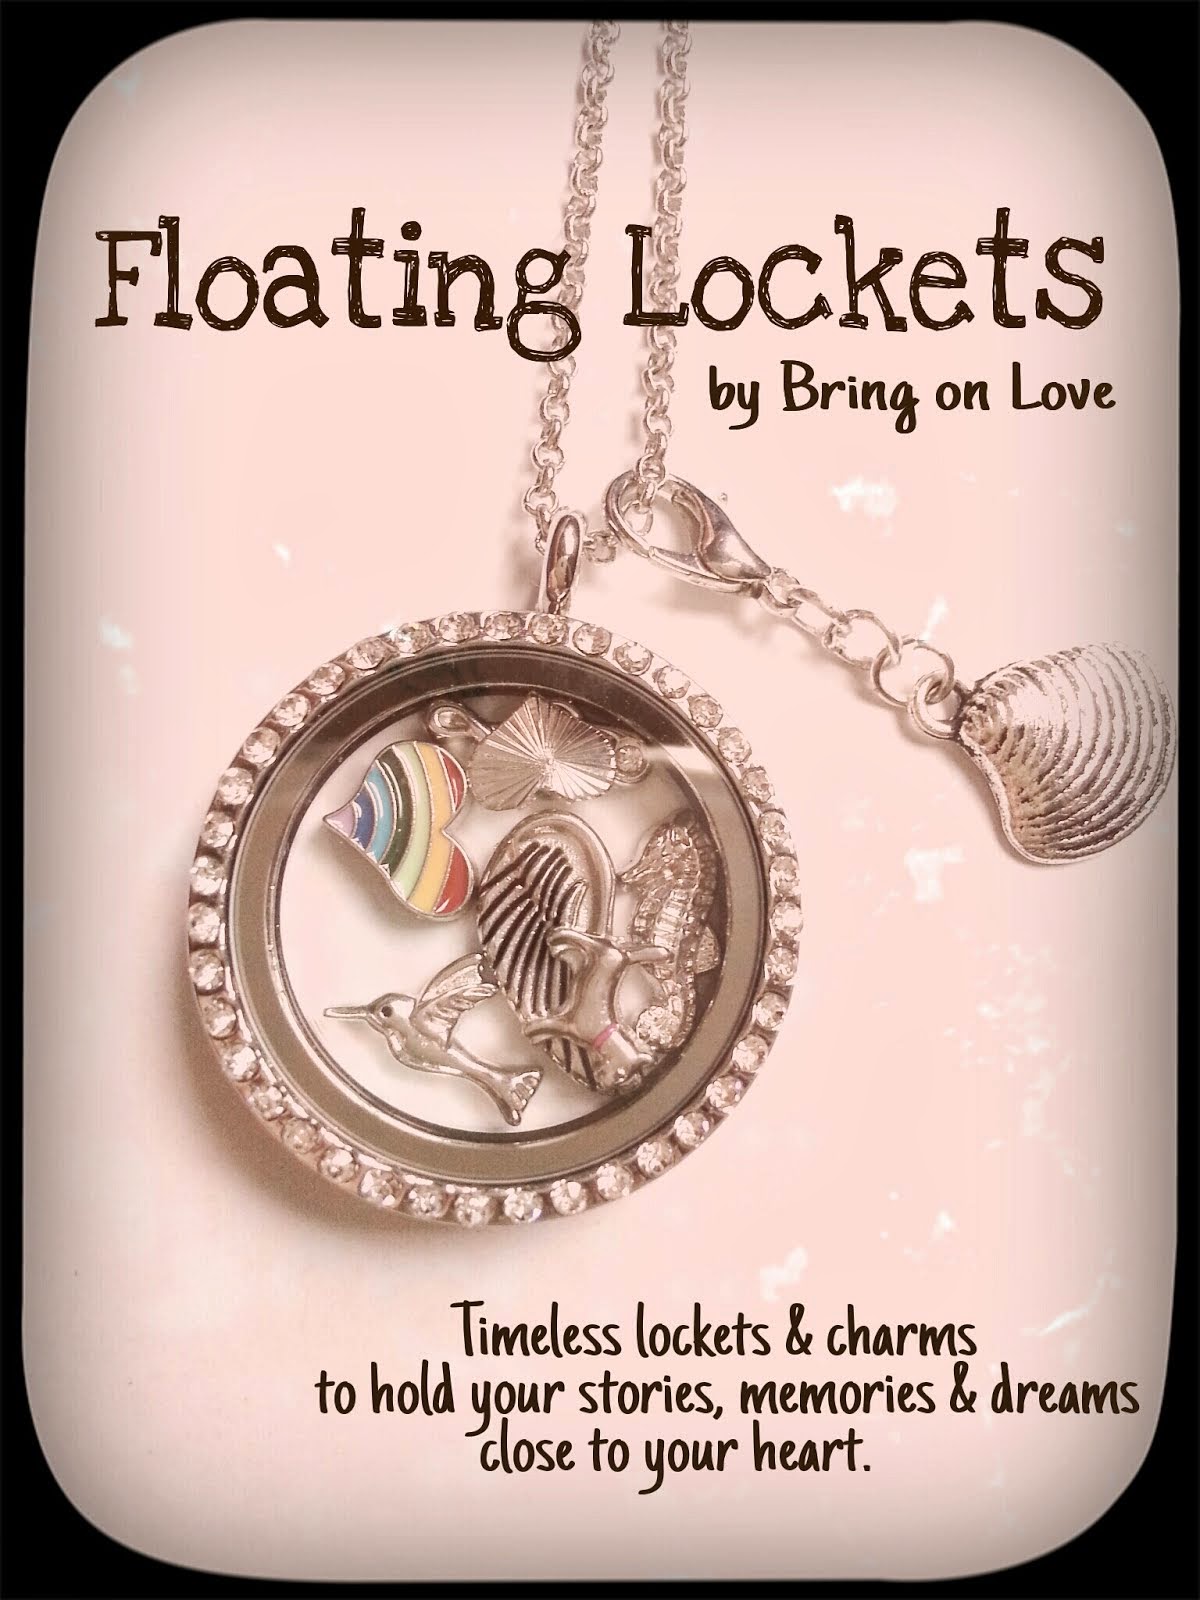 Floating Lockets by Bring on Love